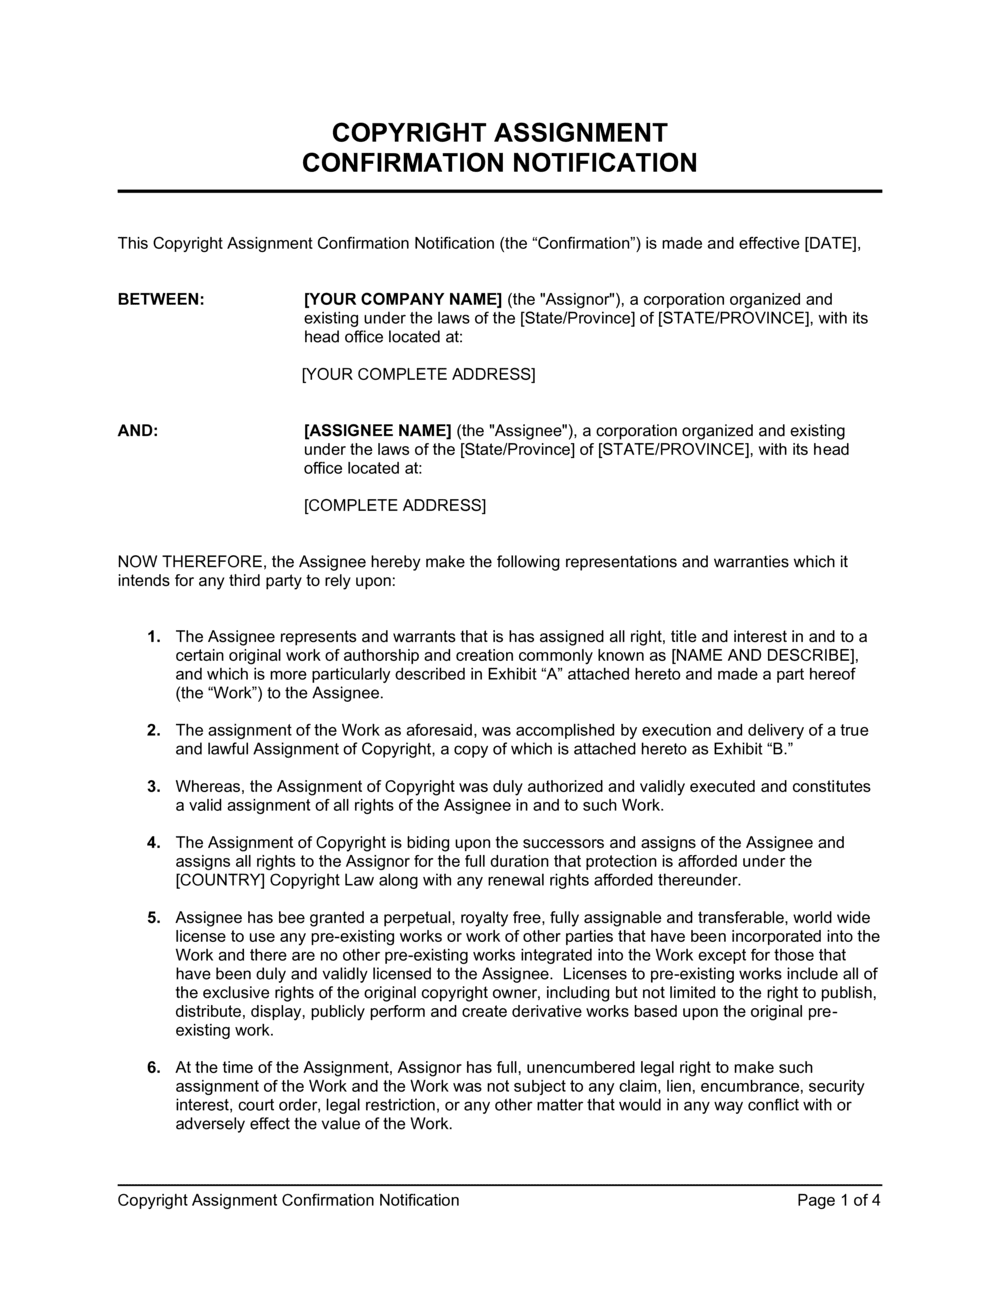 Copyright Assignment Confirmation Notification Template  by Pertaining To claim assignment agreement template